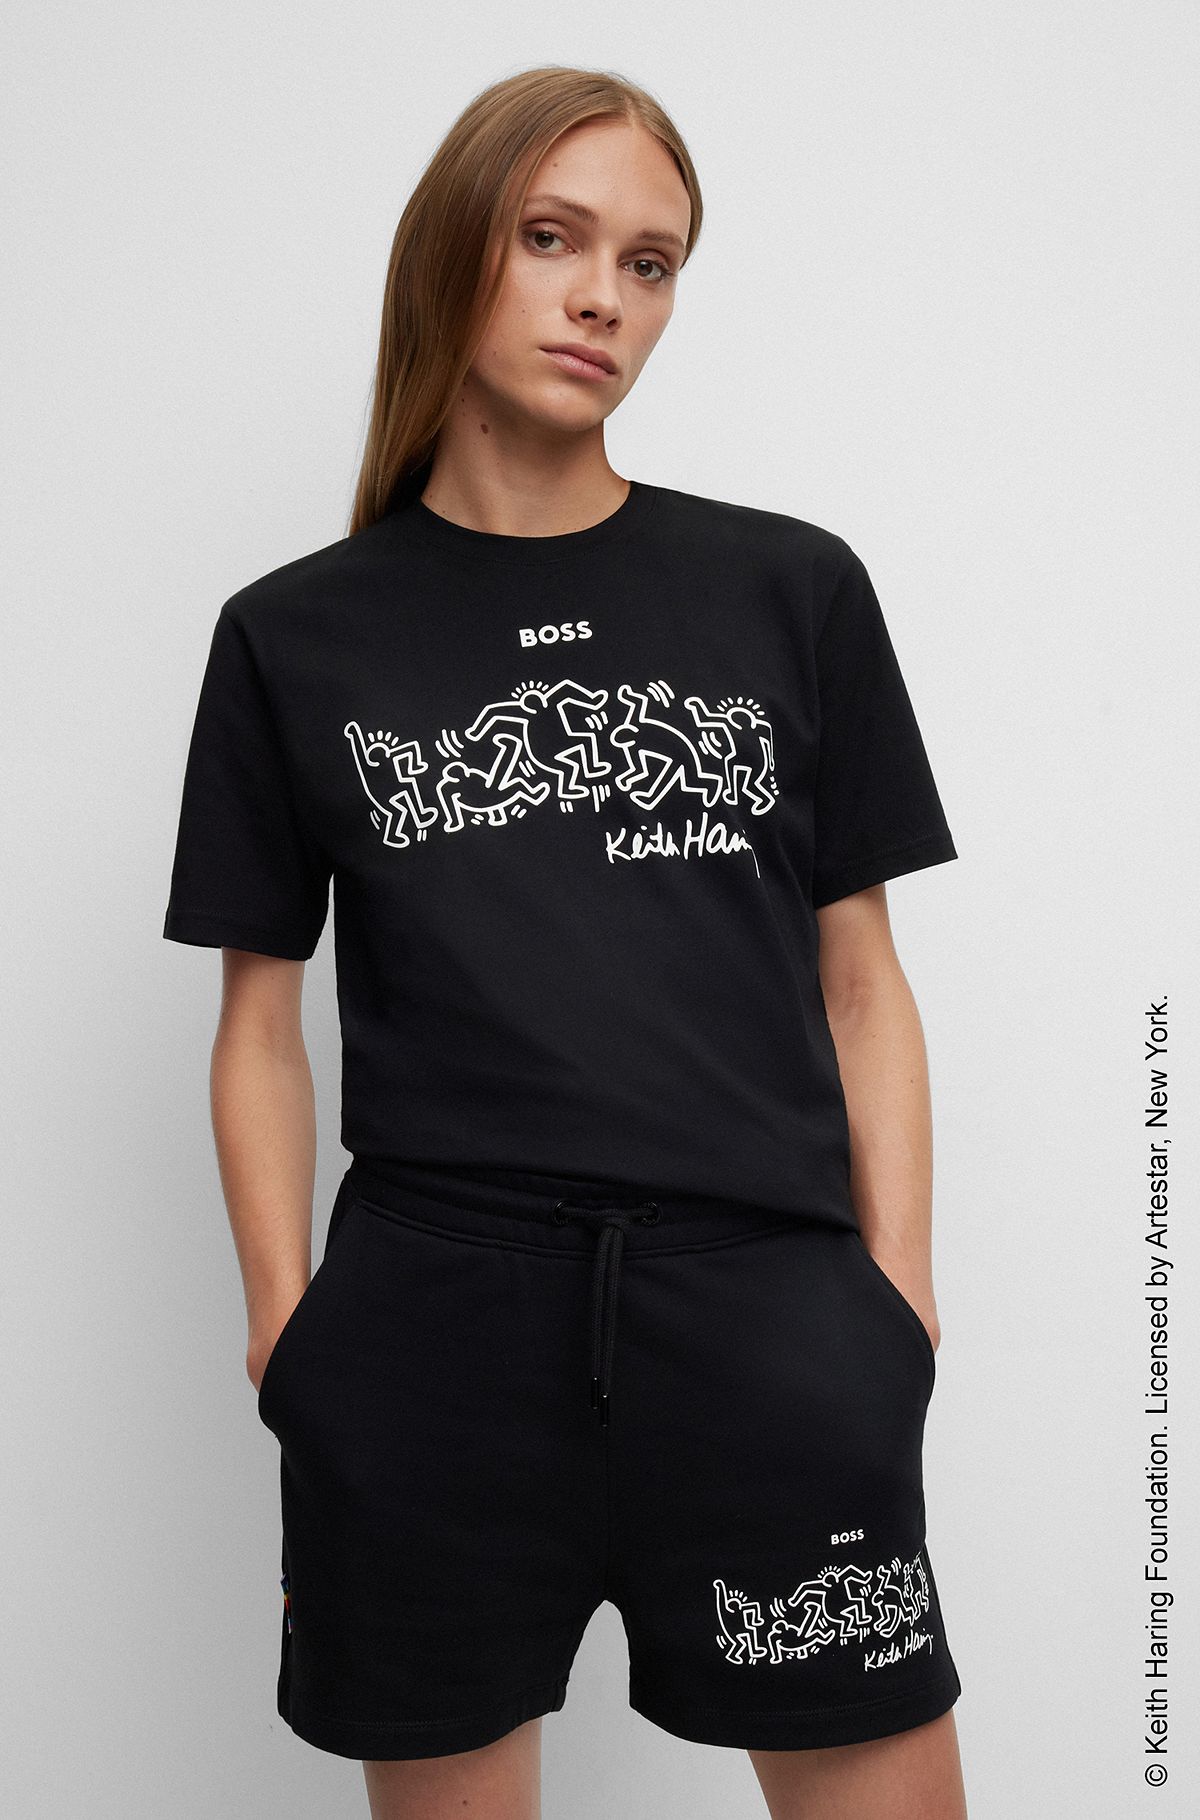 BOSS x Keith Haring gender-neutral T-shirt with special logo artwork, Black